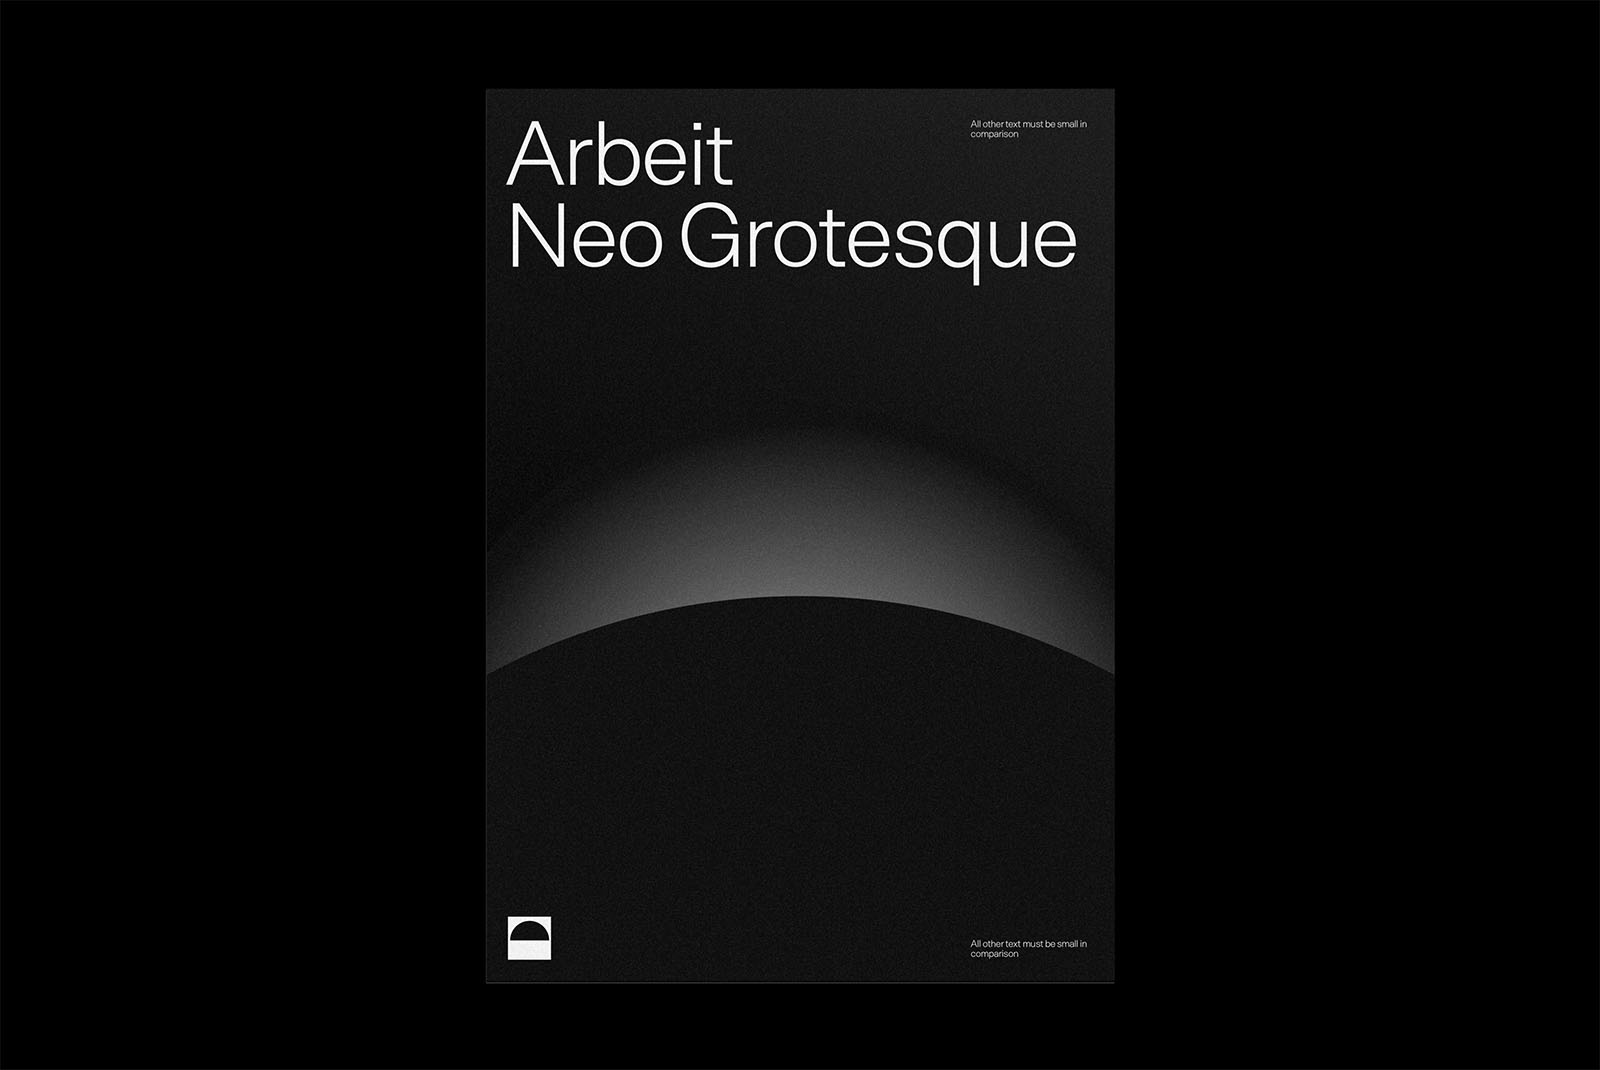 Minimalist font design poster for Arbeit Neo Grotesque typeface against a dark background, ideal for designers looking for typography inspiration.